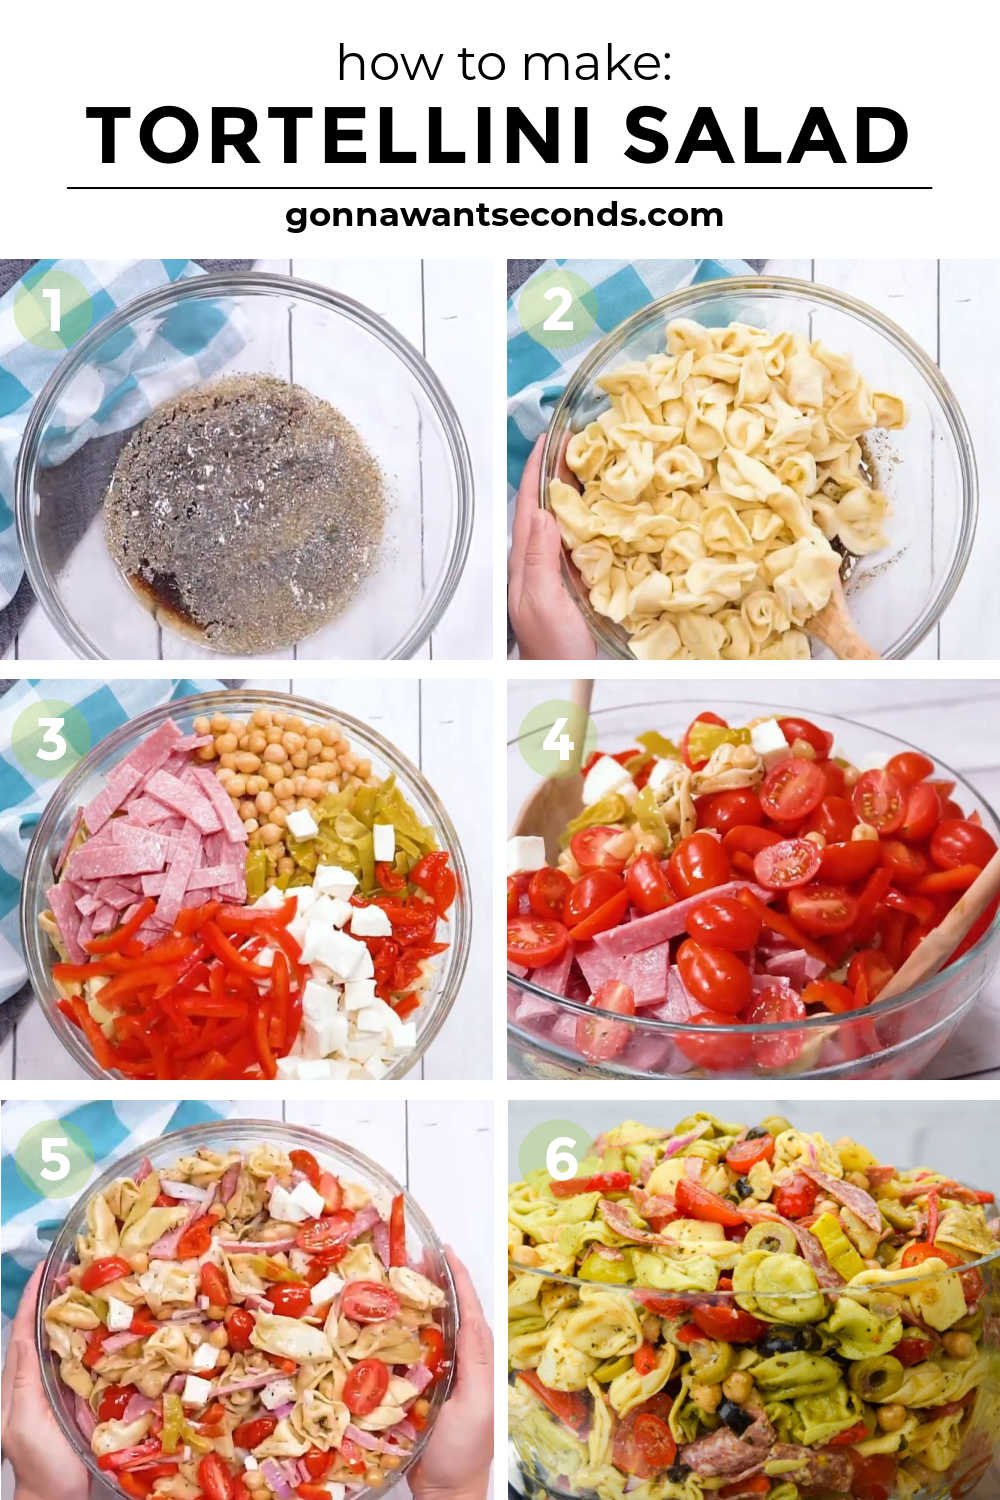 Step by step how to make tortellini salad